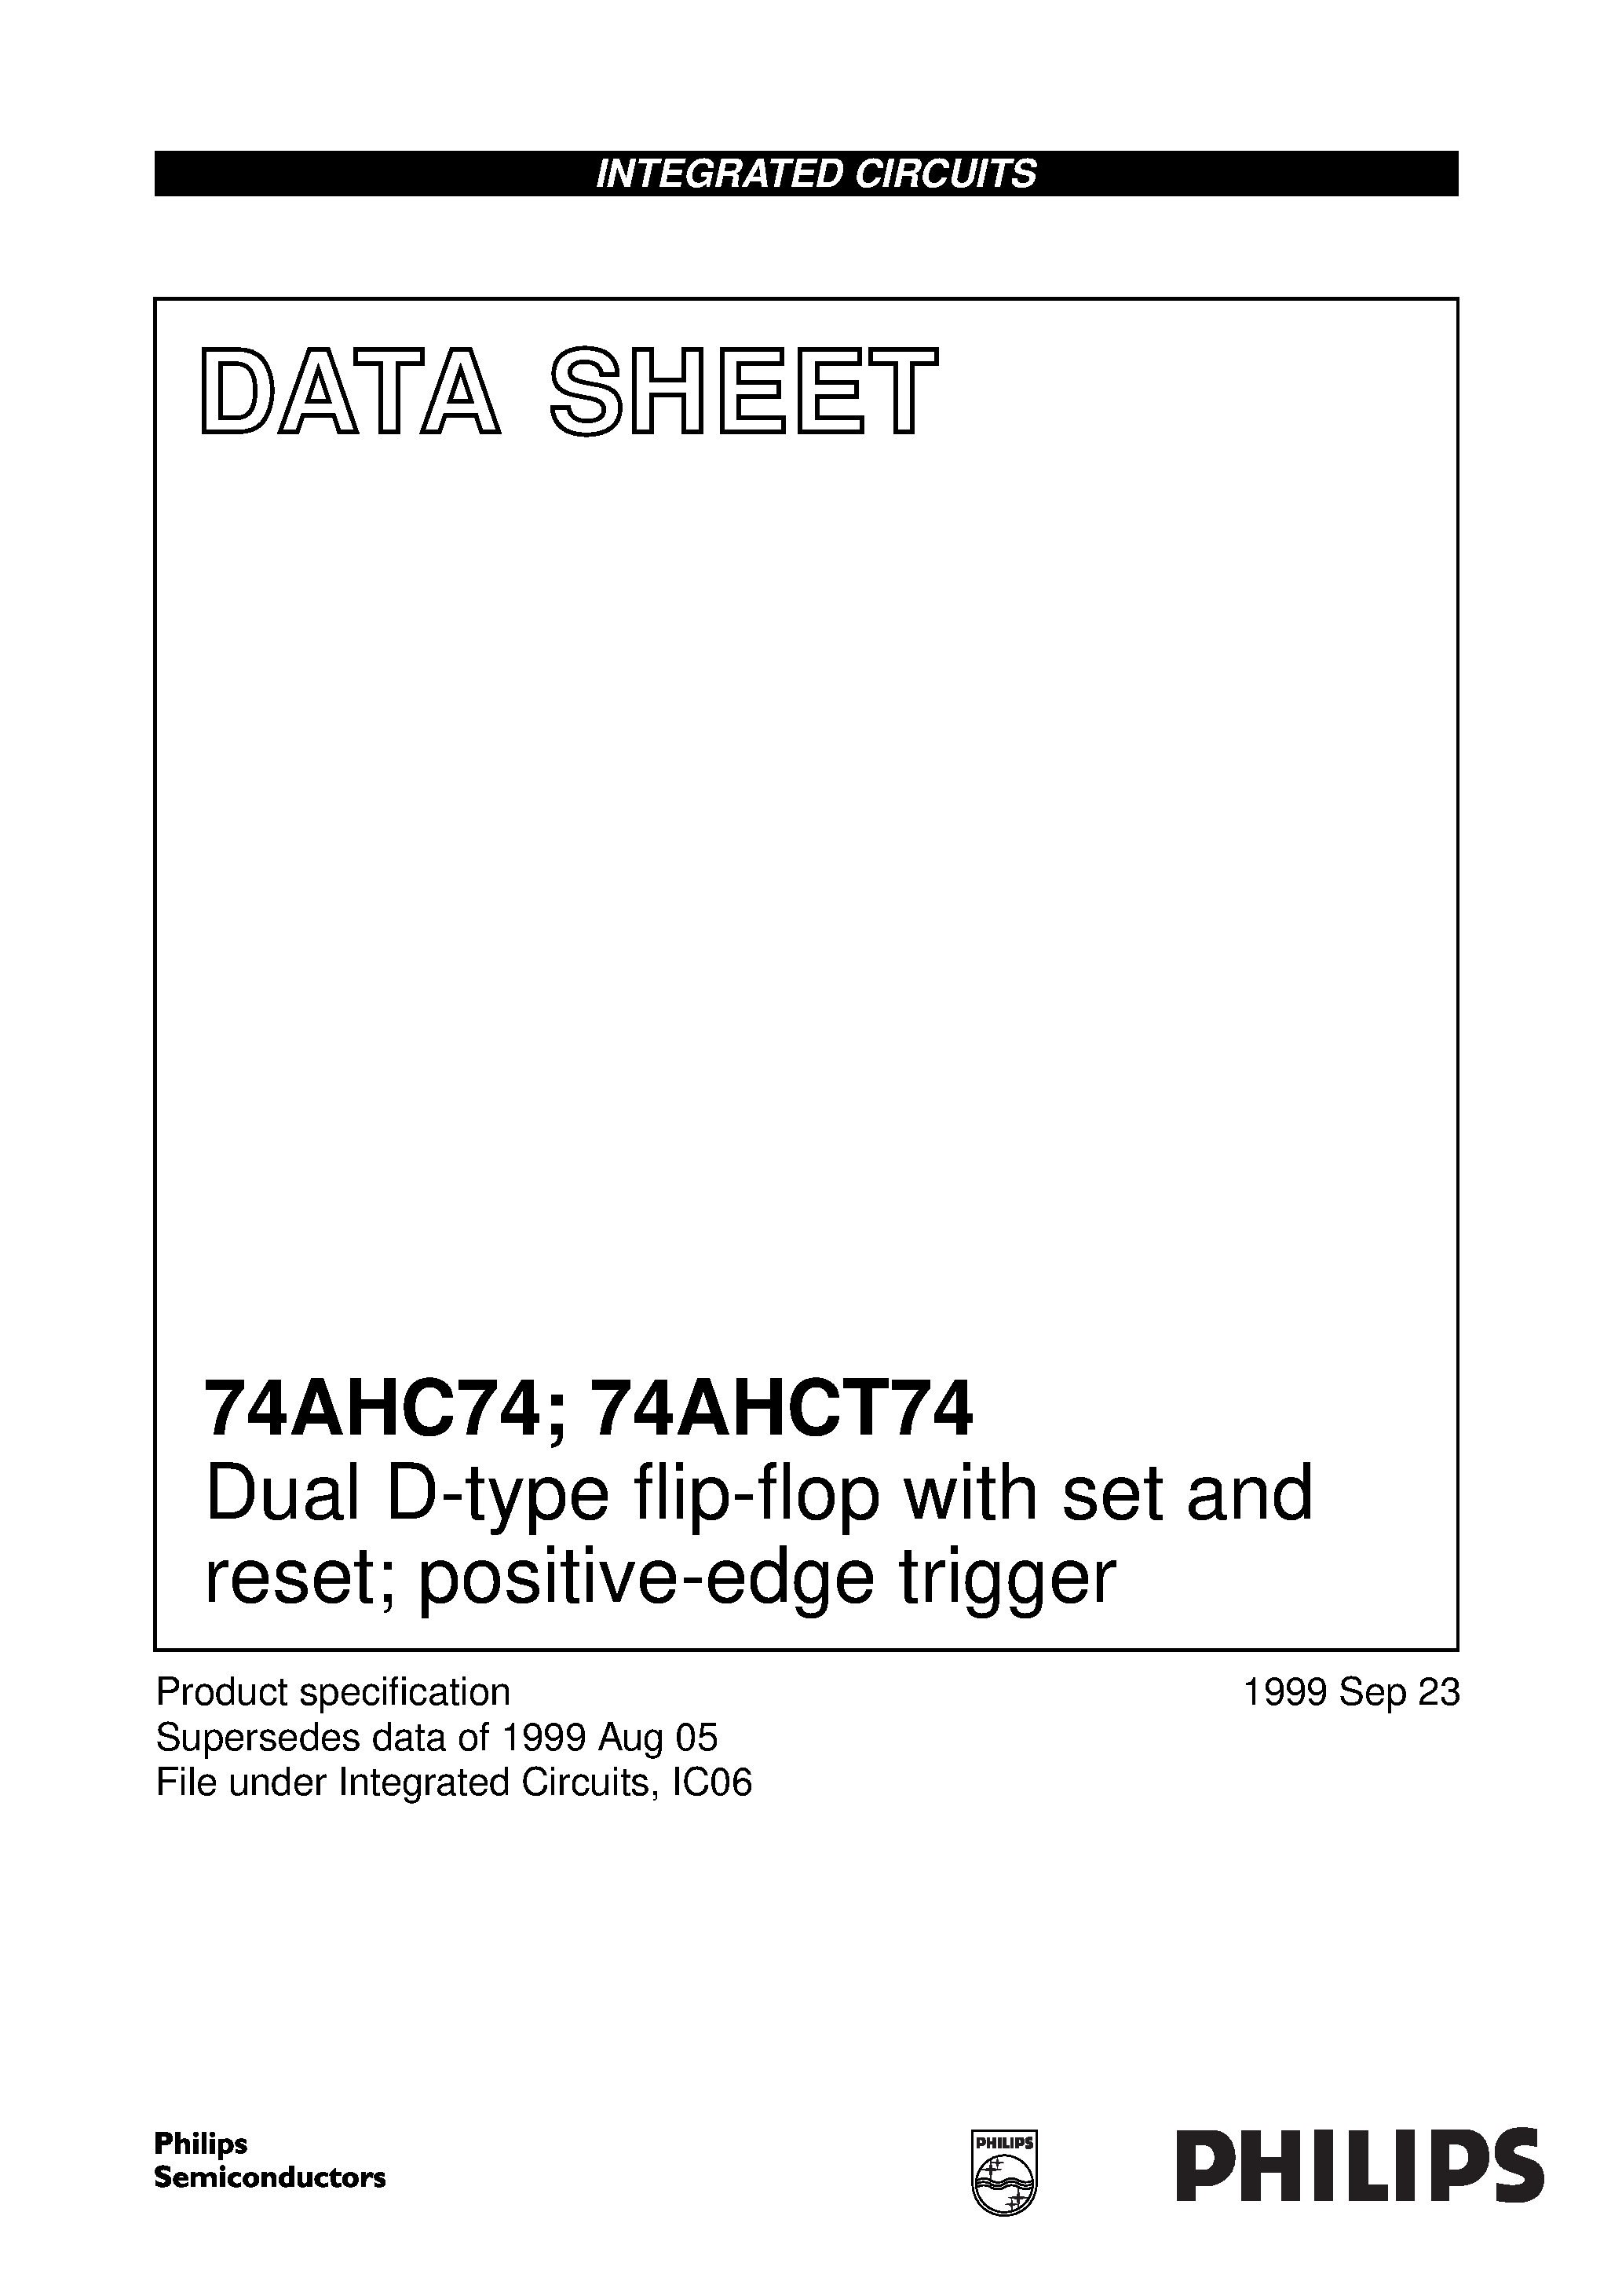 Datasheet 74AHCT74D - Dual D-type flip-flop with set and reset; positive-edge trigger page 1